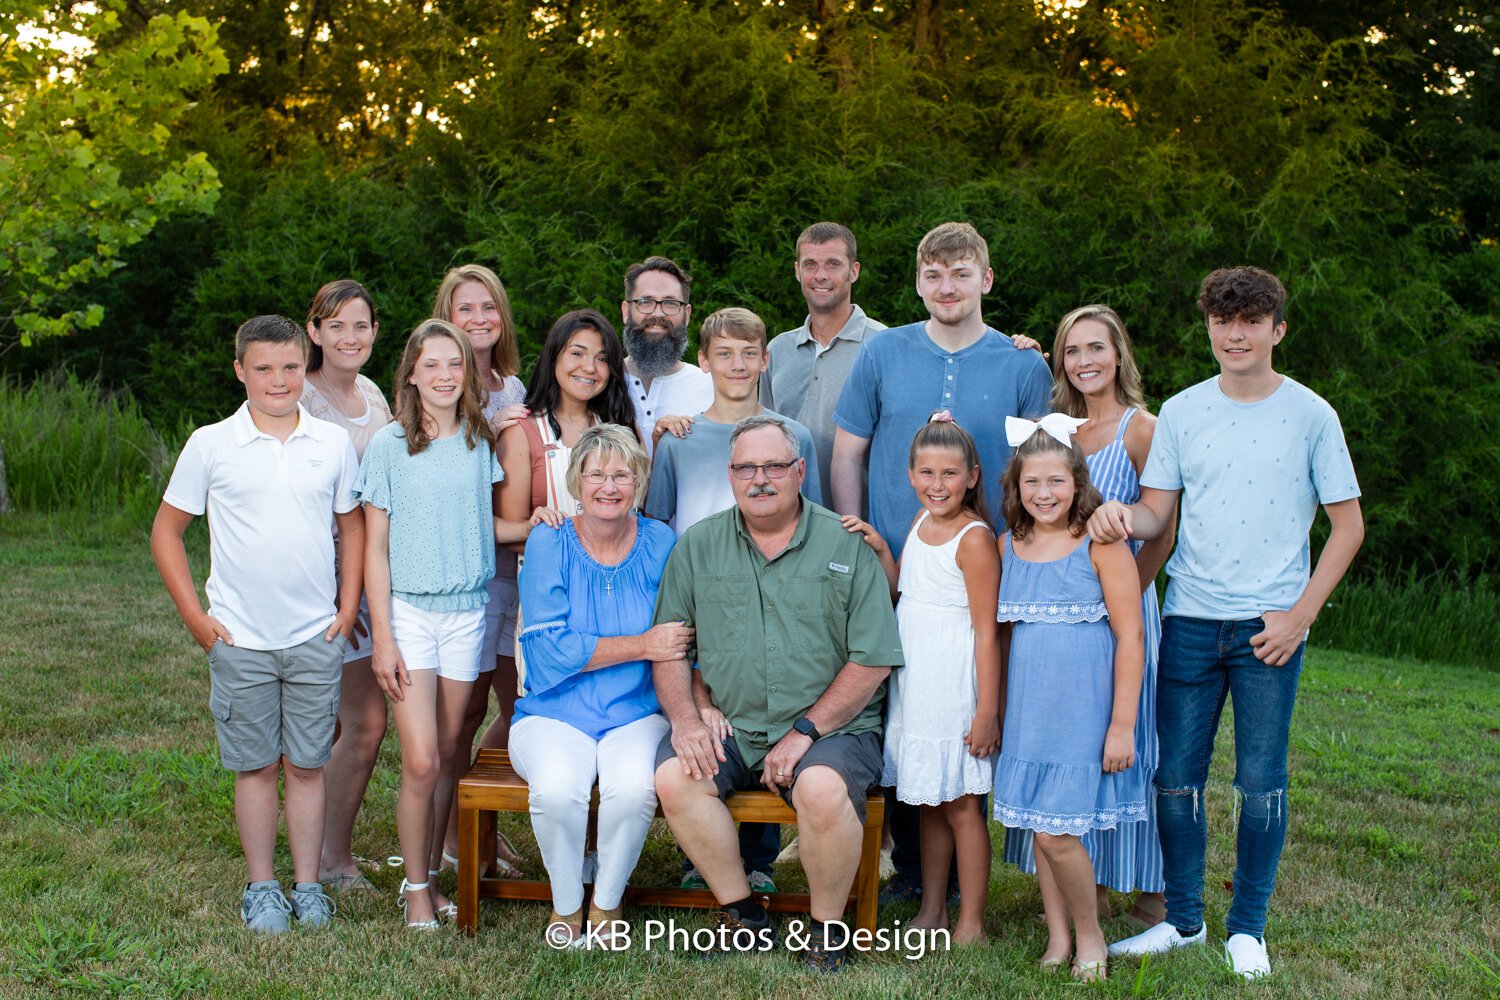 Family-McCleery-Lake-of-the-Ozarks-family-reunion-vacation-photos-Osage-Beach-suprise-engagement-KB-Photos-and-Design-photography-2.JPG